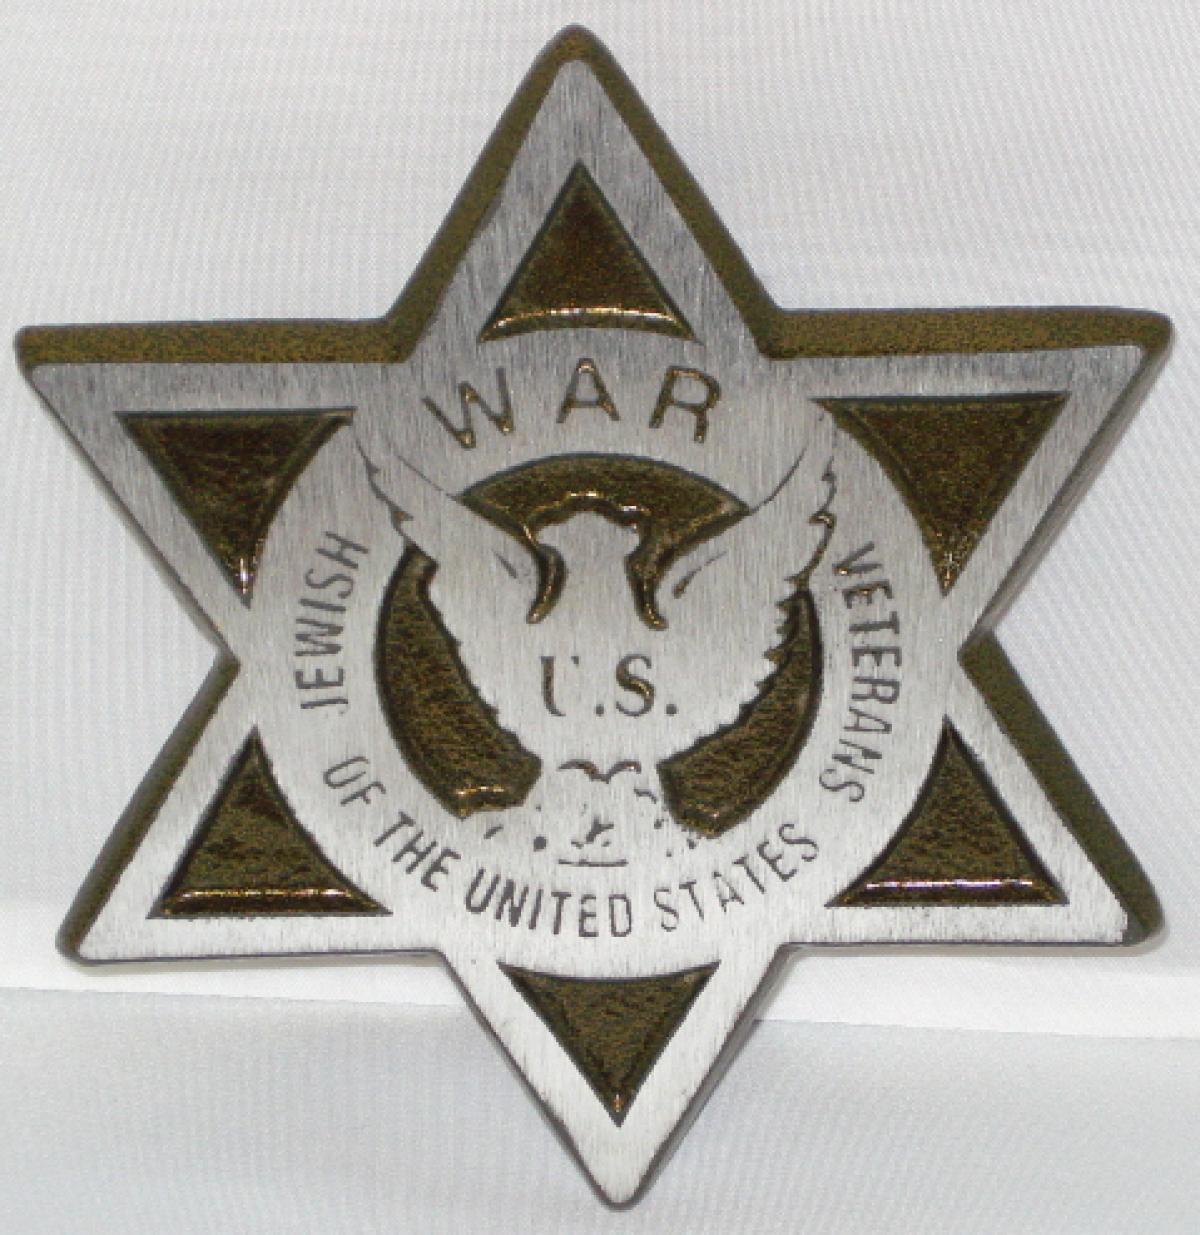 OK, Grove, Headstone Symbols and Meanings, Jewish Veteran of United States Wars